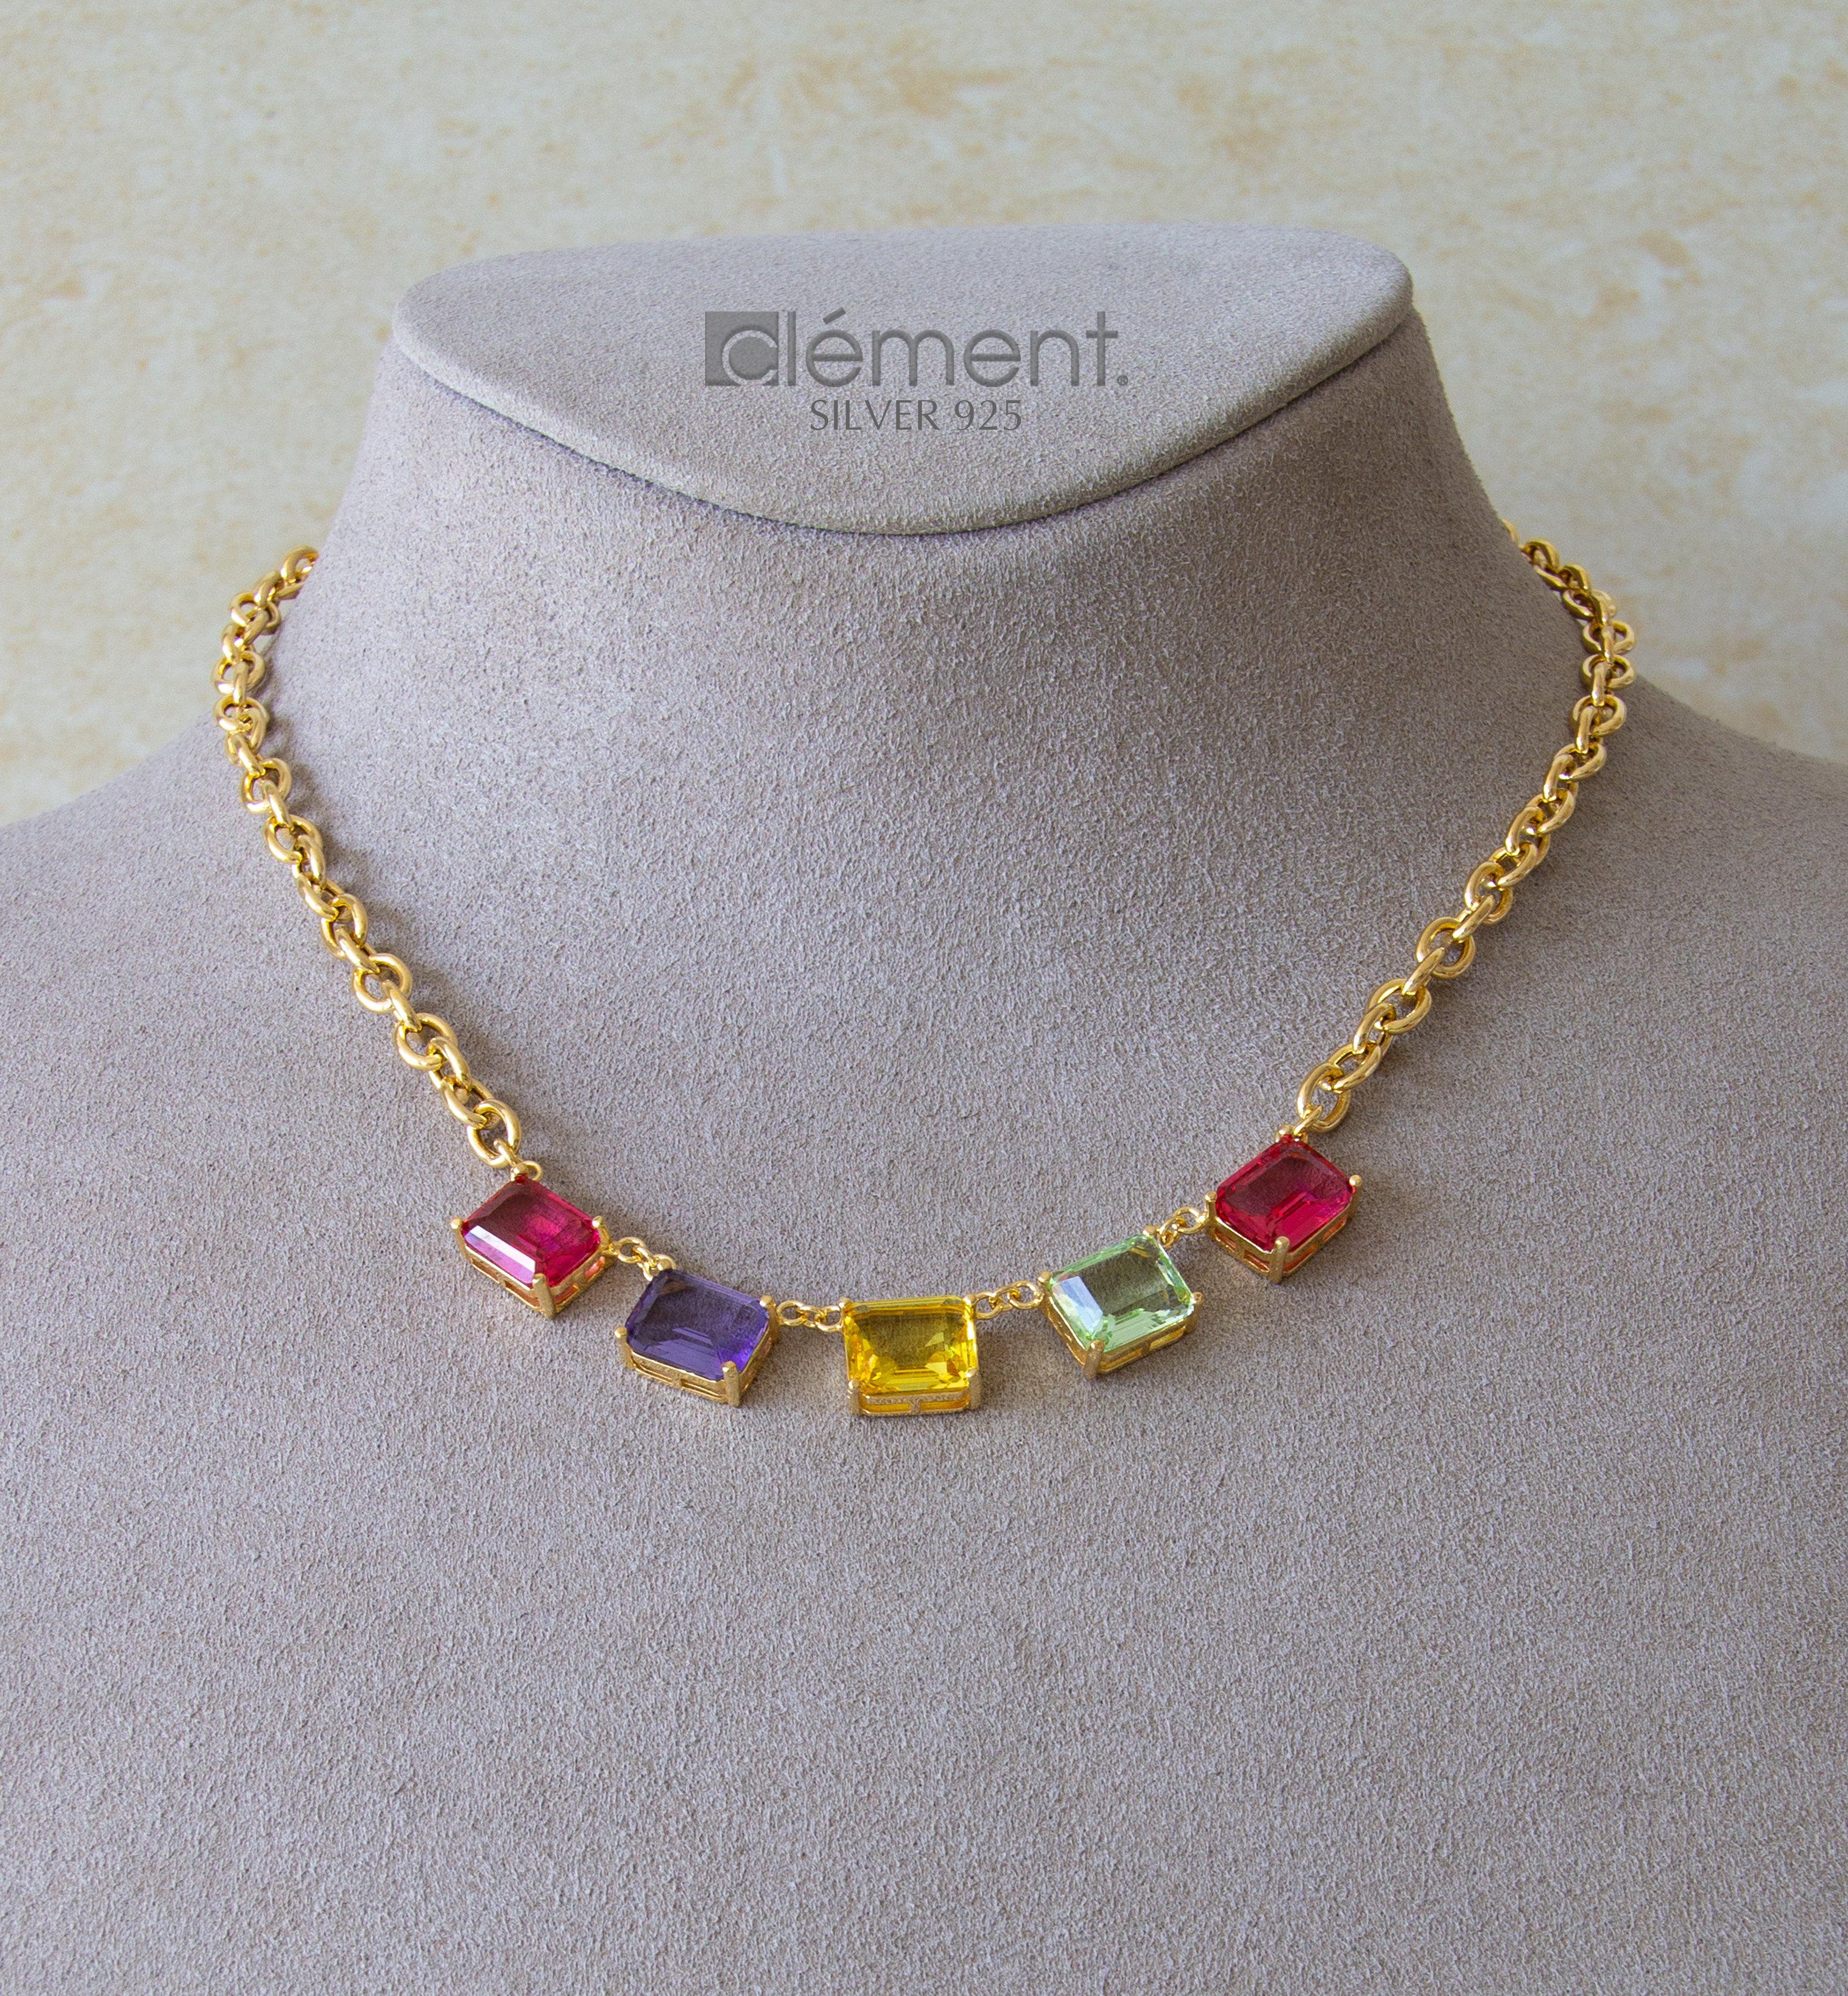 Silver 925 Yellow Gold Plated Necklace with Coloured CZ Stones